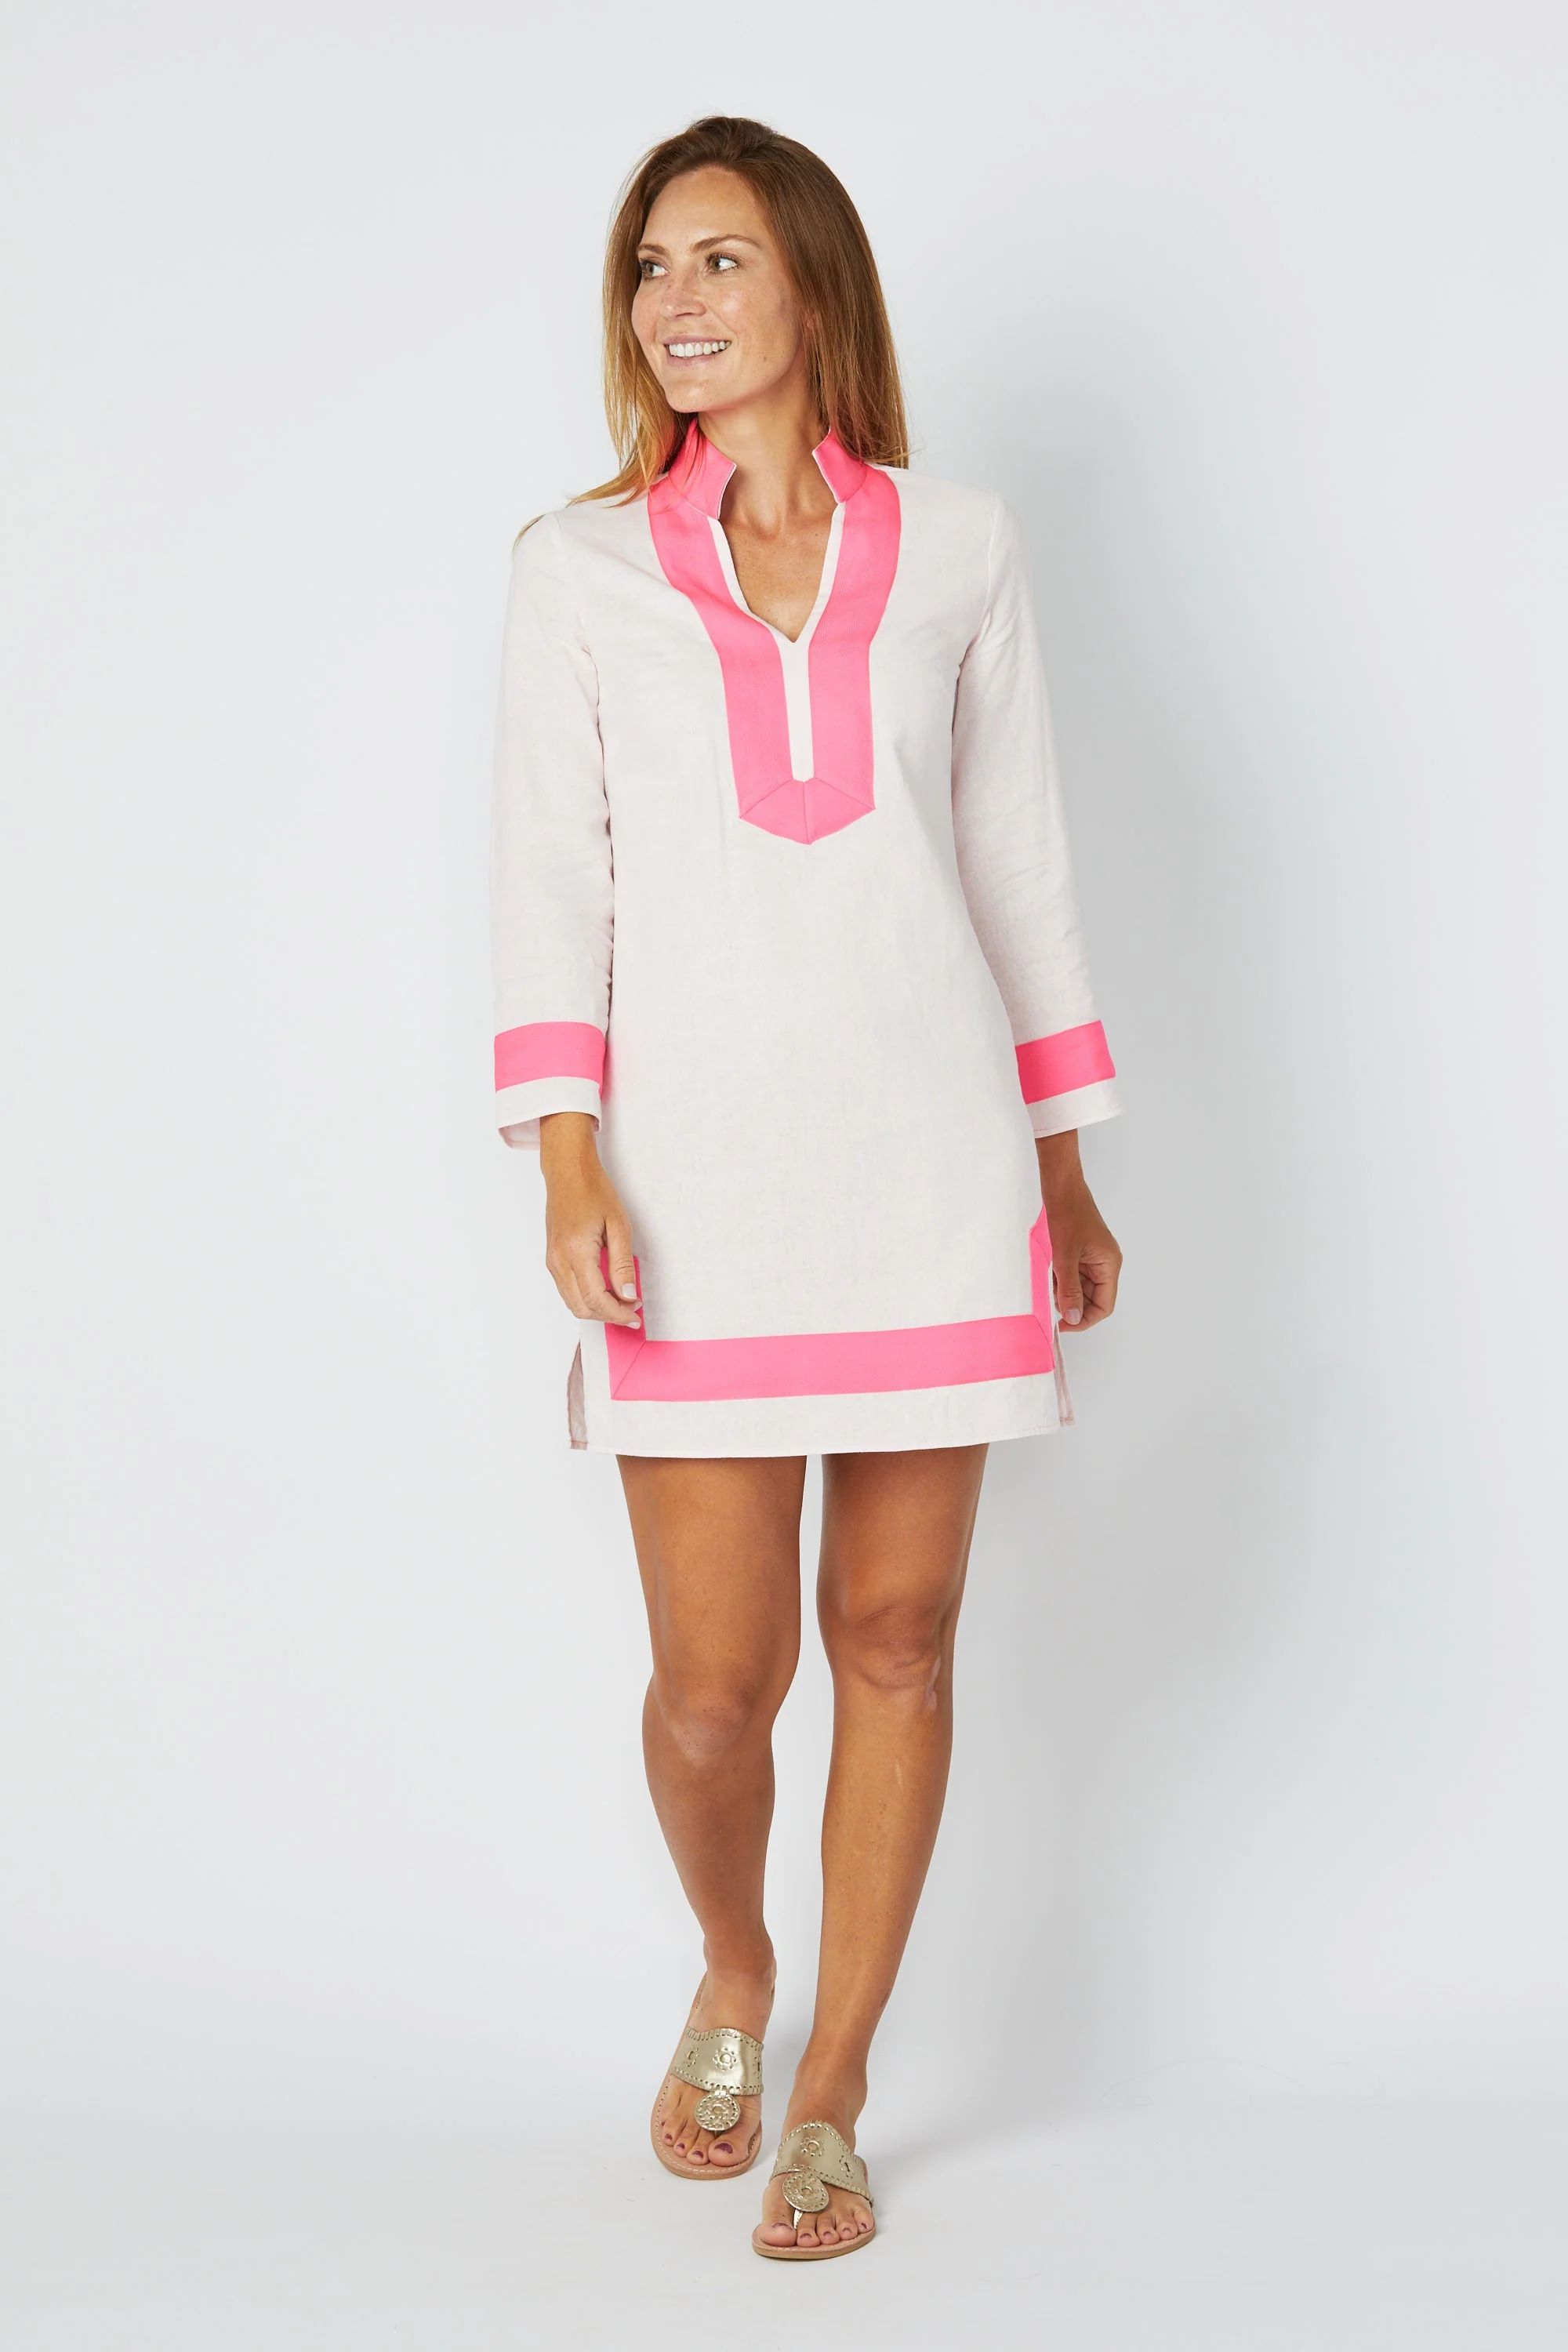 Blush Long Sleeve Classic Tunic with Hot Pink Grosgrain Trim | Sail to Sable